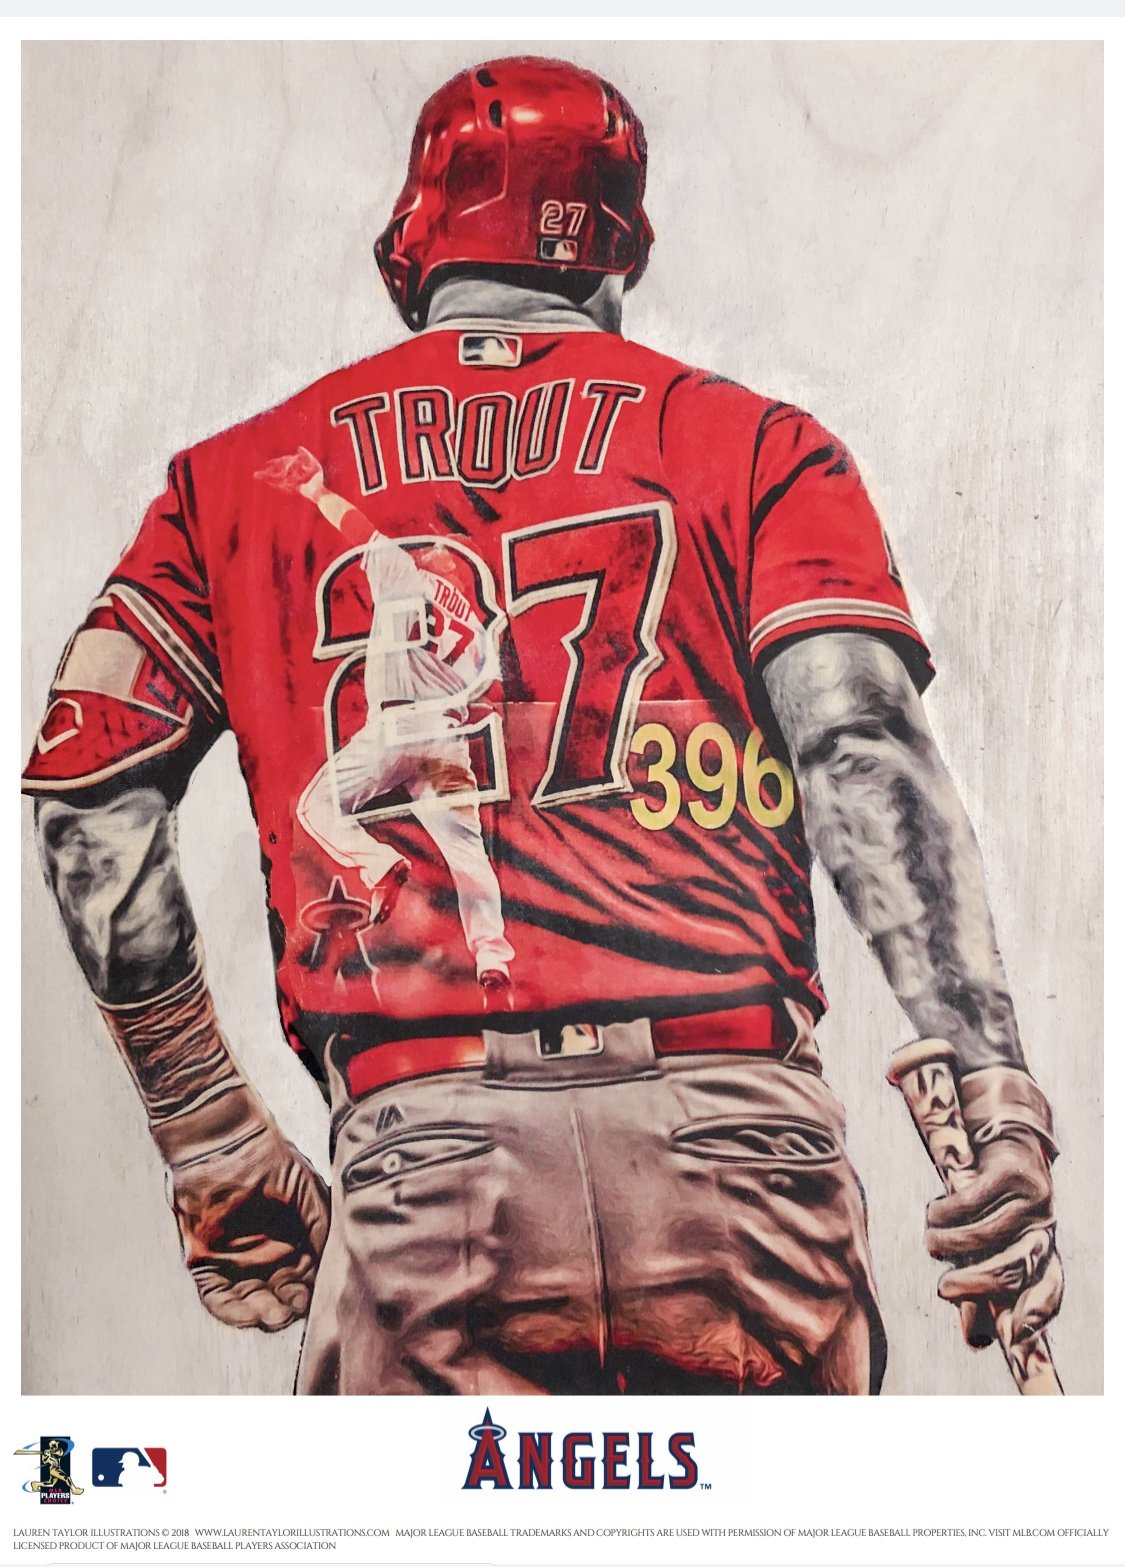 WAR Lord (Mike Trout) Los Angeles Angels - Officially Licensed MLB P